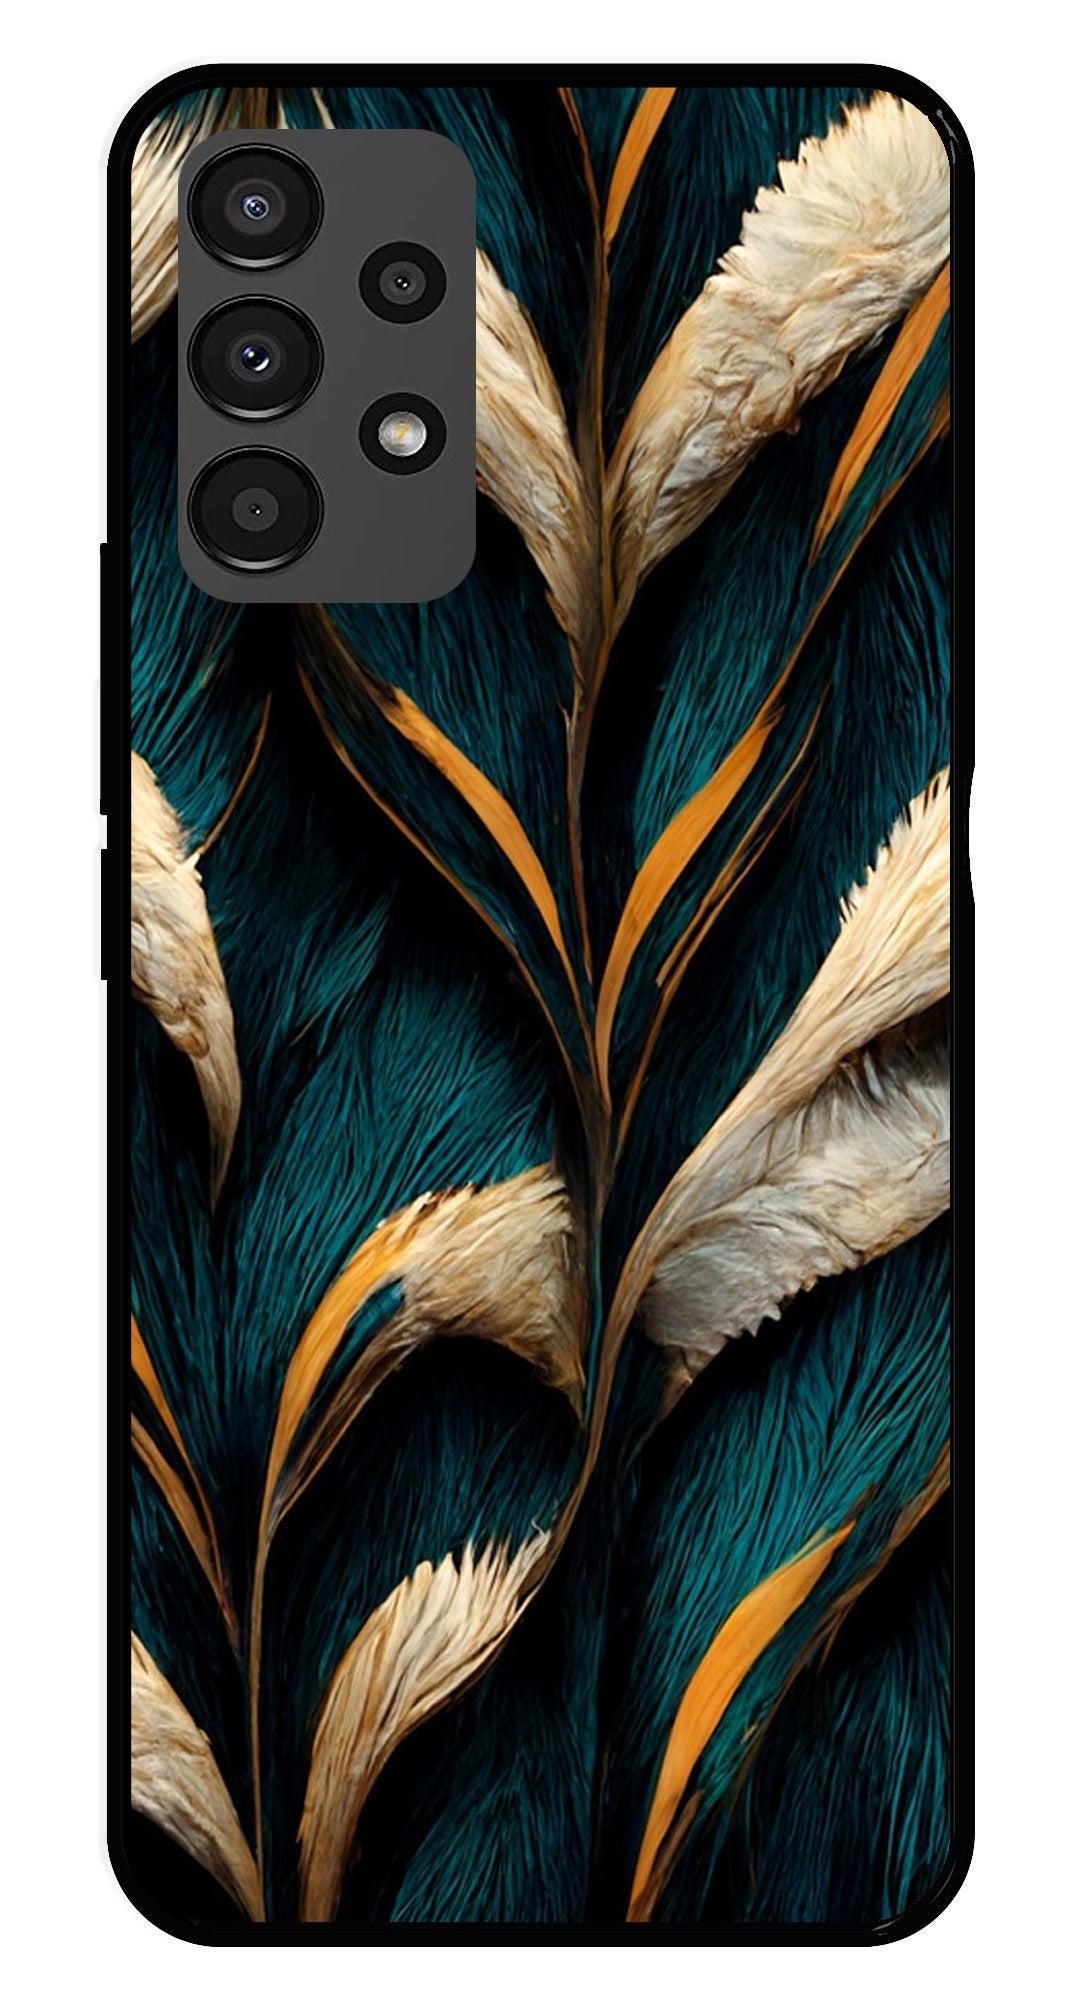 Feathers Metal Mobile Case for Samsung Galaxy A13 4G   (Design No -30)